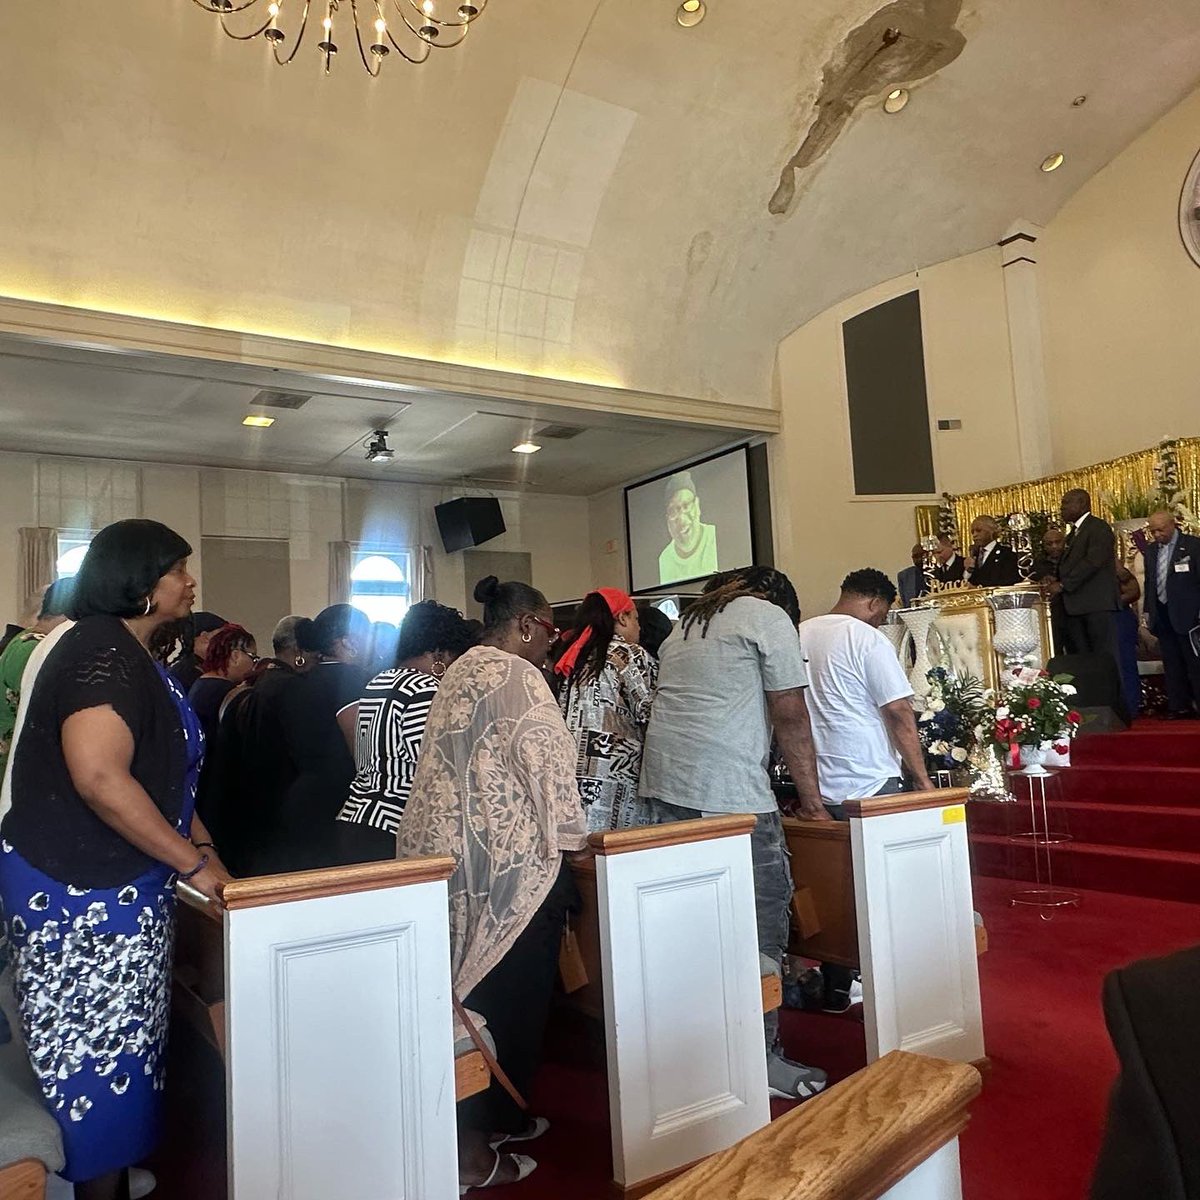 Saying my final remarks and the closing prayer today at the homegoing service for Frank Tyson. Frank was a 53 year old Black man of Canton, Ohio who died after repeatedly telling police, “I can’t breathe.” The body camera footage that has been released shows a Canton police…